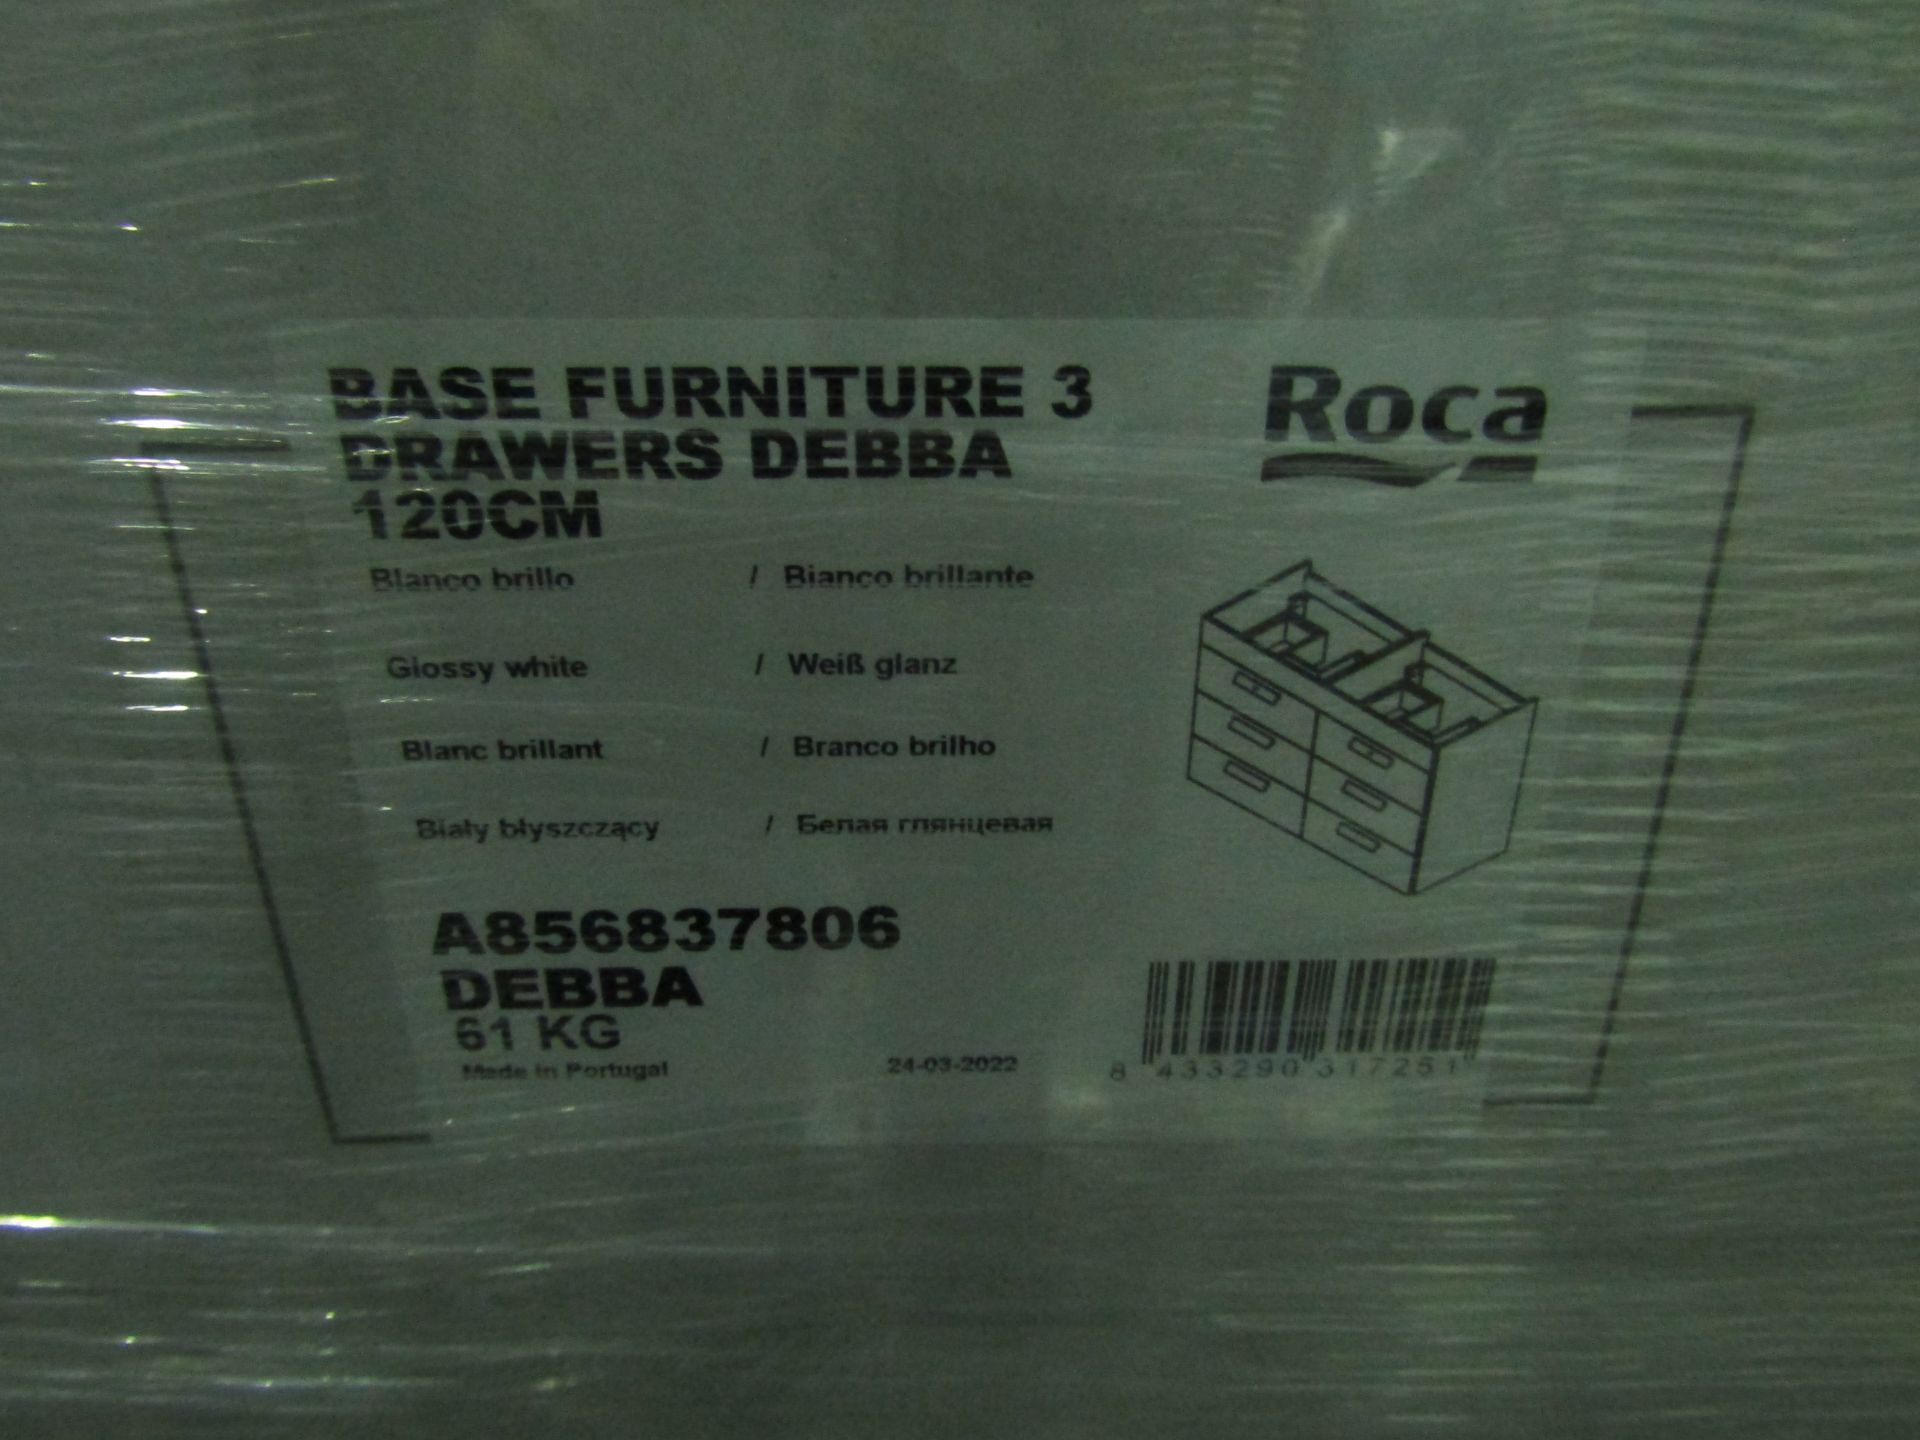 Roca - Debba 1200mm 6 Soft Close Drawer Basin Unit - Gloss White - A856837806 - New & Boxed. RRP ? - Image 2 of 2